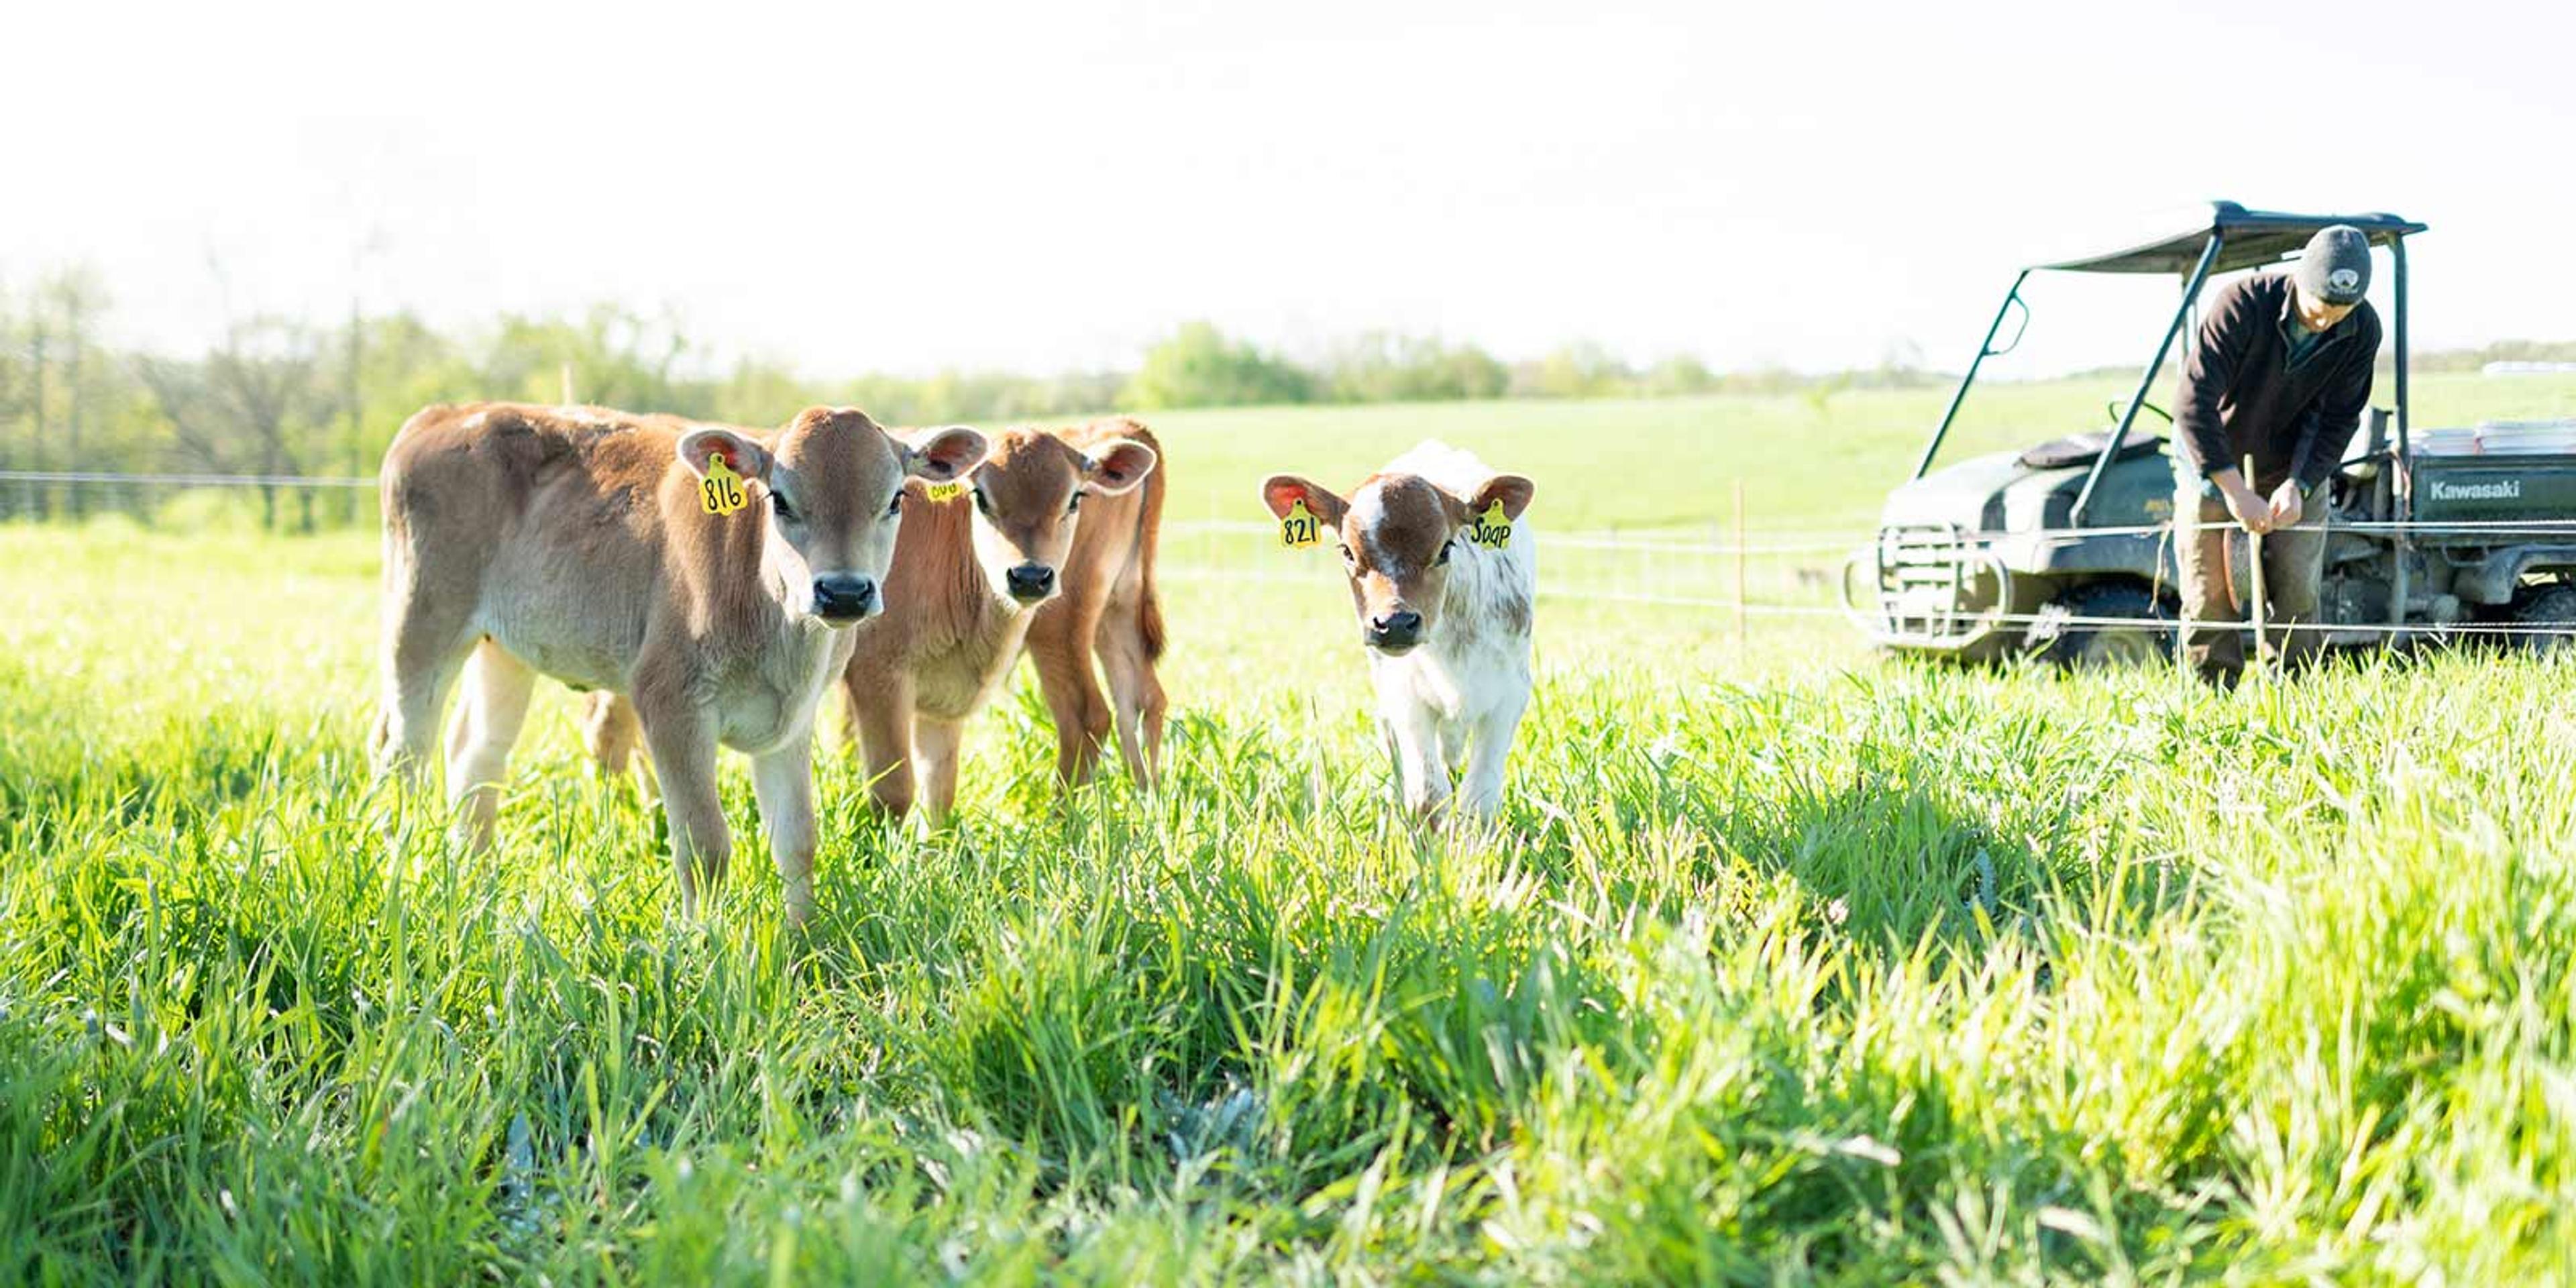 Three calves look at the camera while standing in tall grass. In the background, an Organic Valley farmer adjusts the fence.